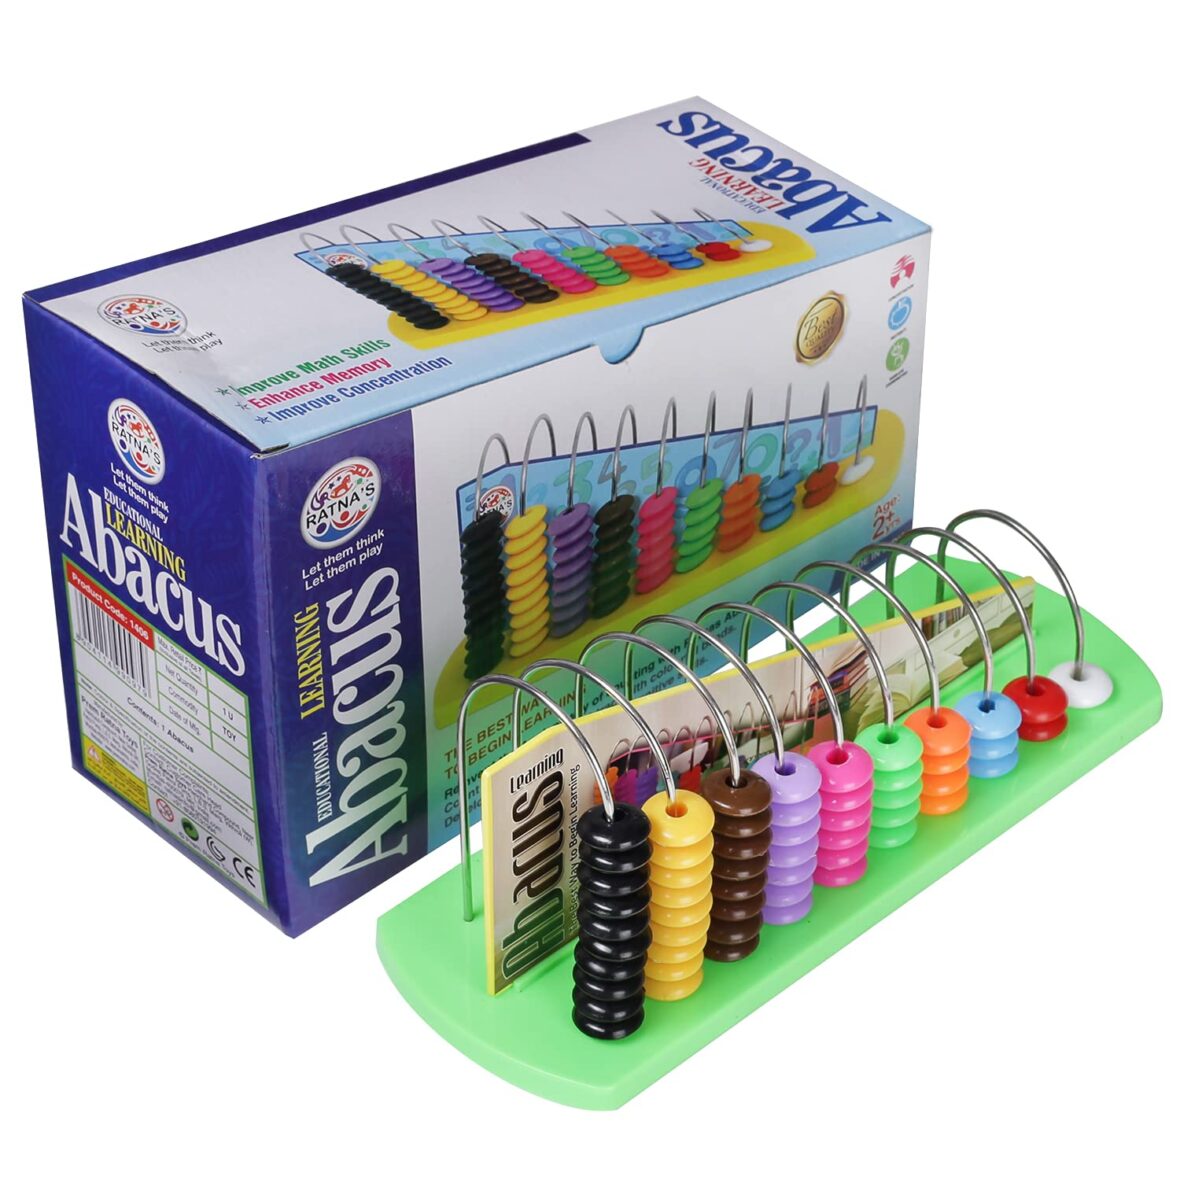 Ratna’s Learning Abacus by U smile Baby World